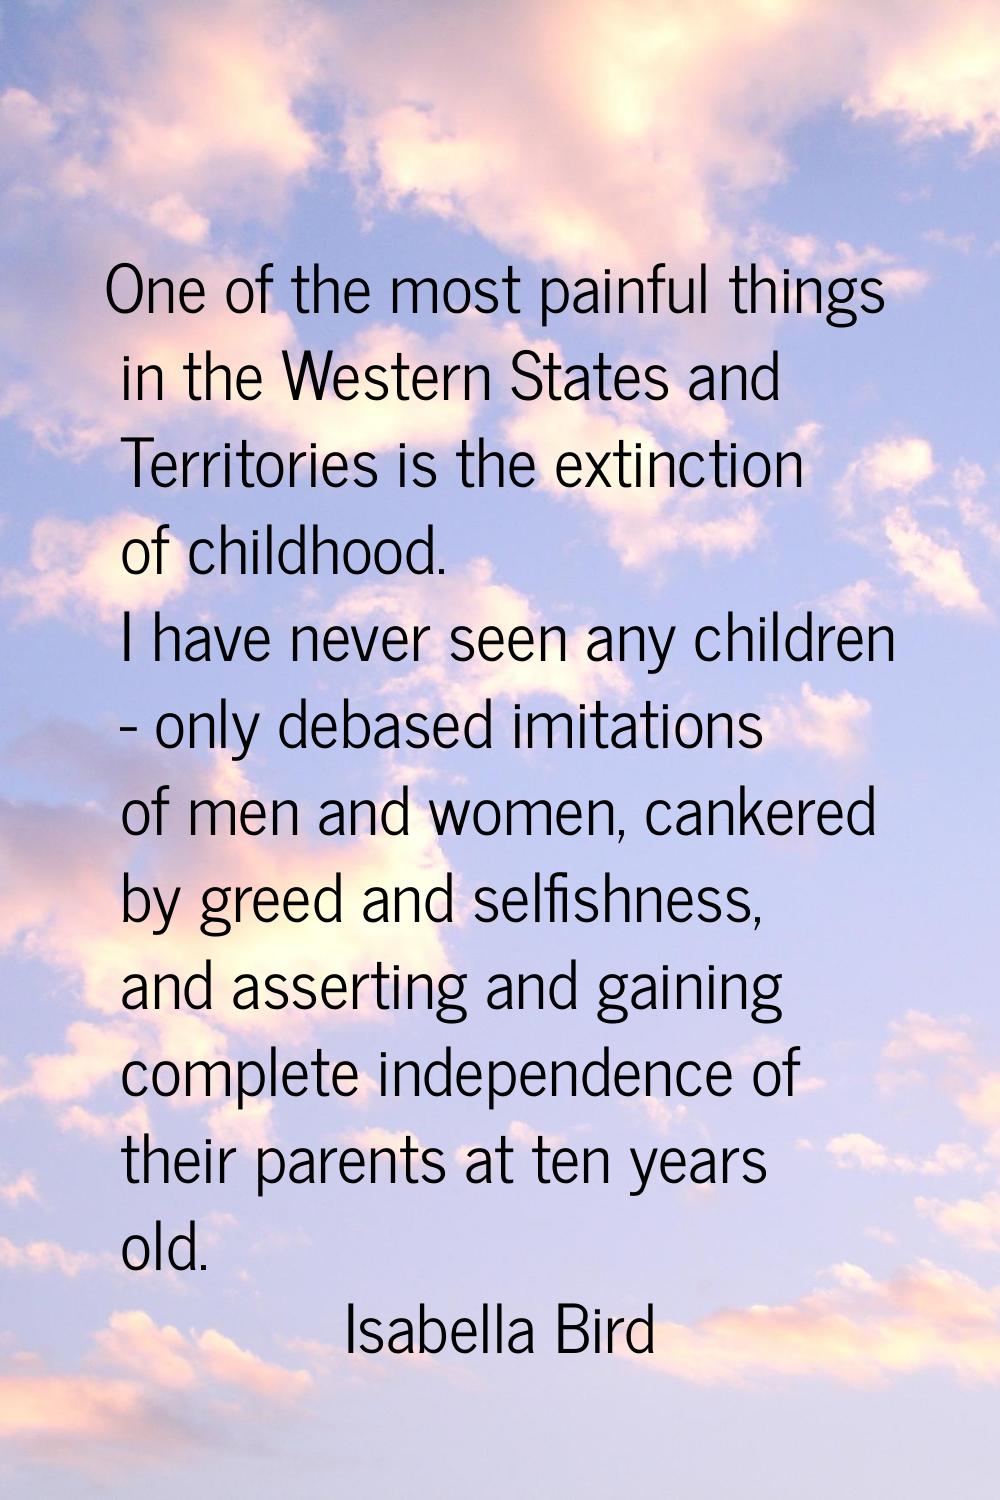 One of the most painful things in the Western States and Territories is the extinction of childhood